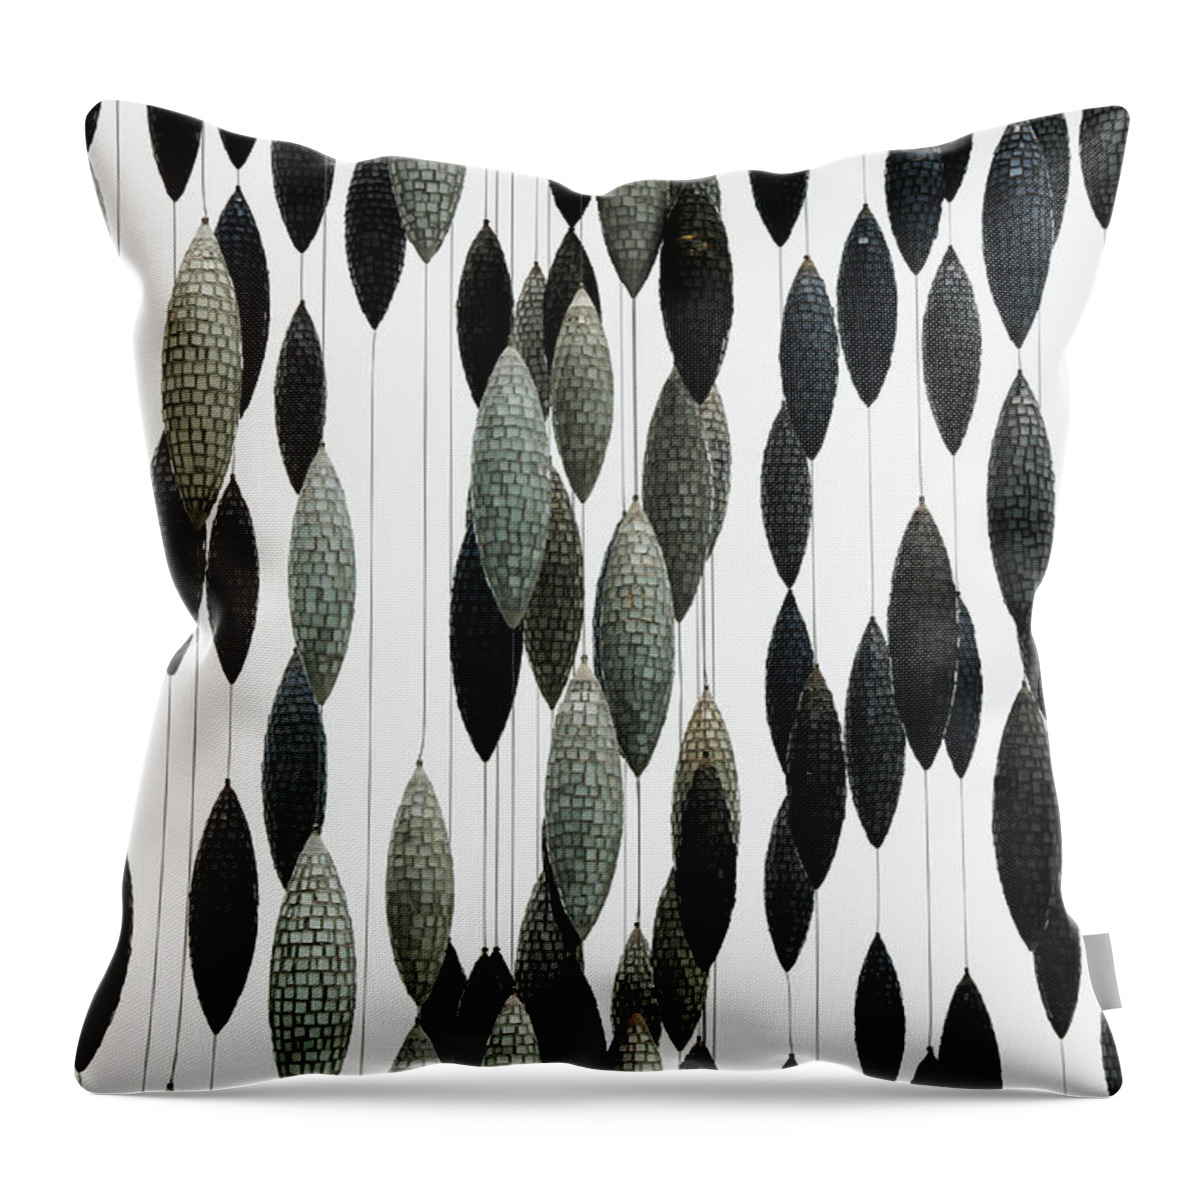 Oval Zebra Stripes Faded Squares Grays Greens Lines Throw Pillow featuring the photograph Oval Zebra Stripes Faded Squares Grays Greens Lines 2 8282017 by David Frederick